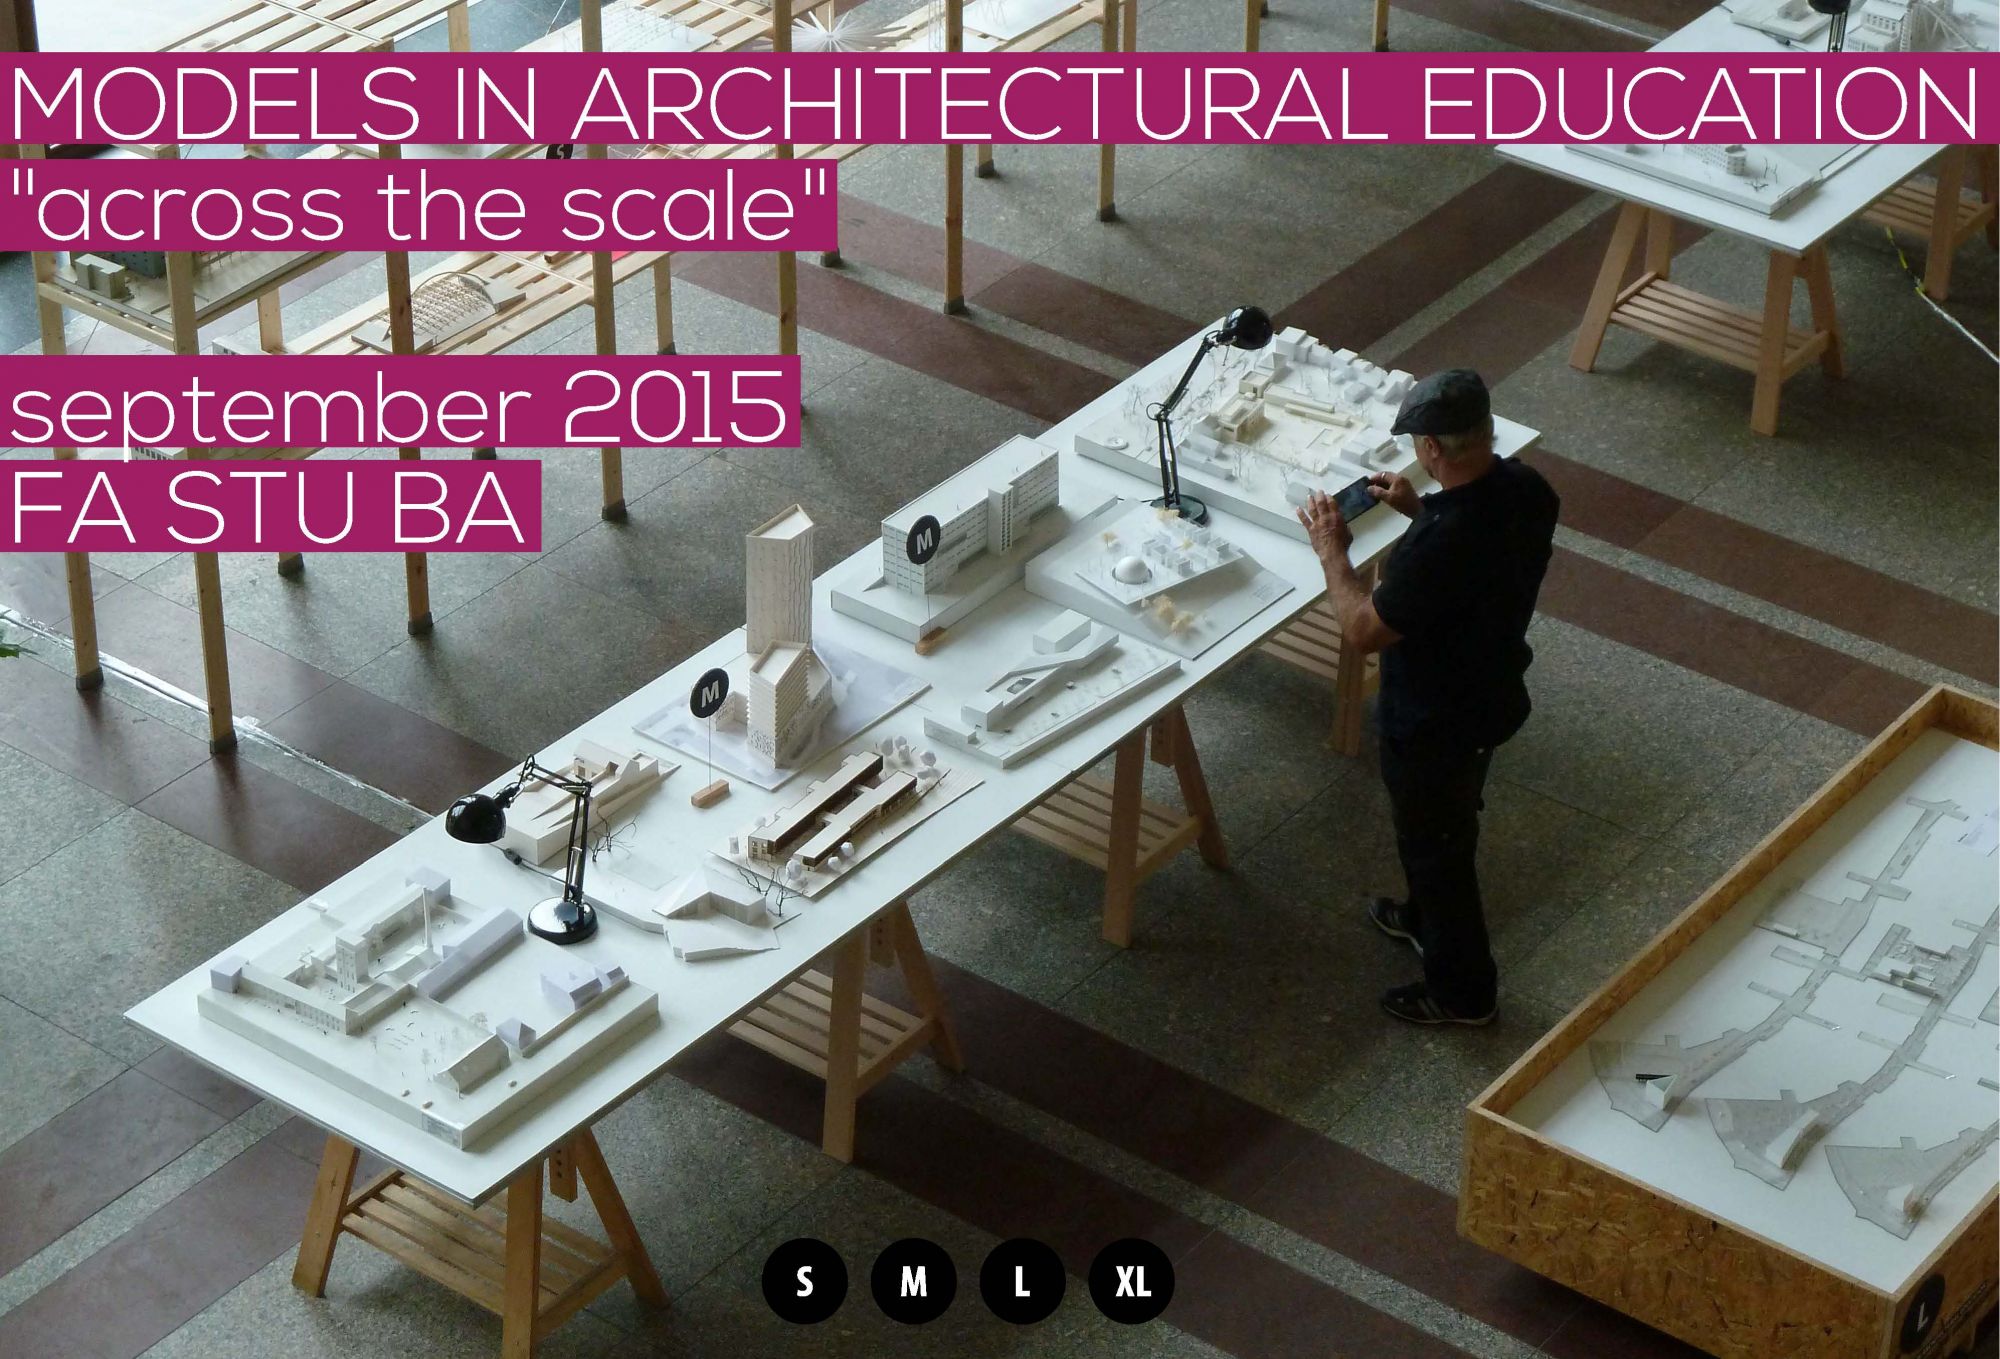 MODELS IN ARCHITECTURAL EDUCATION